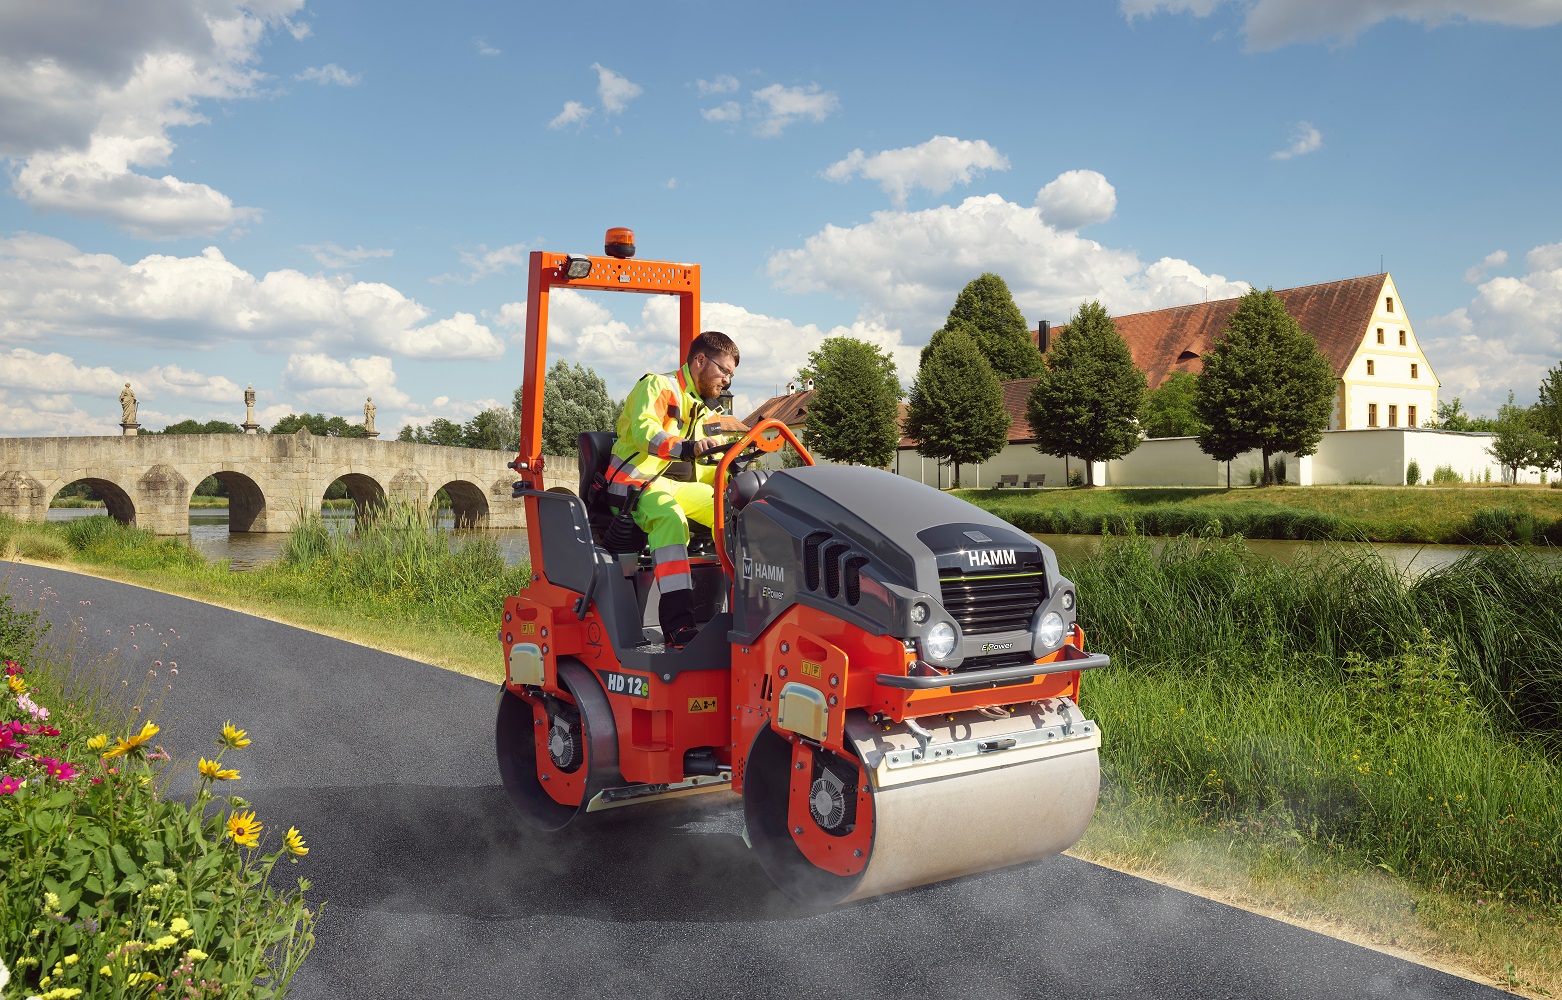 Compactly built and very easy to handle: One Li-ion battery (capacity: 23 kWh) provides the electric rollers in the HD CompactLine from Hamm with enough power for a typical working day.